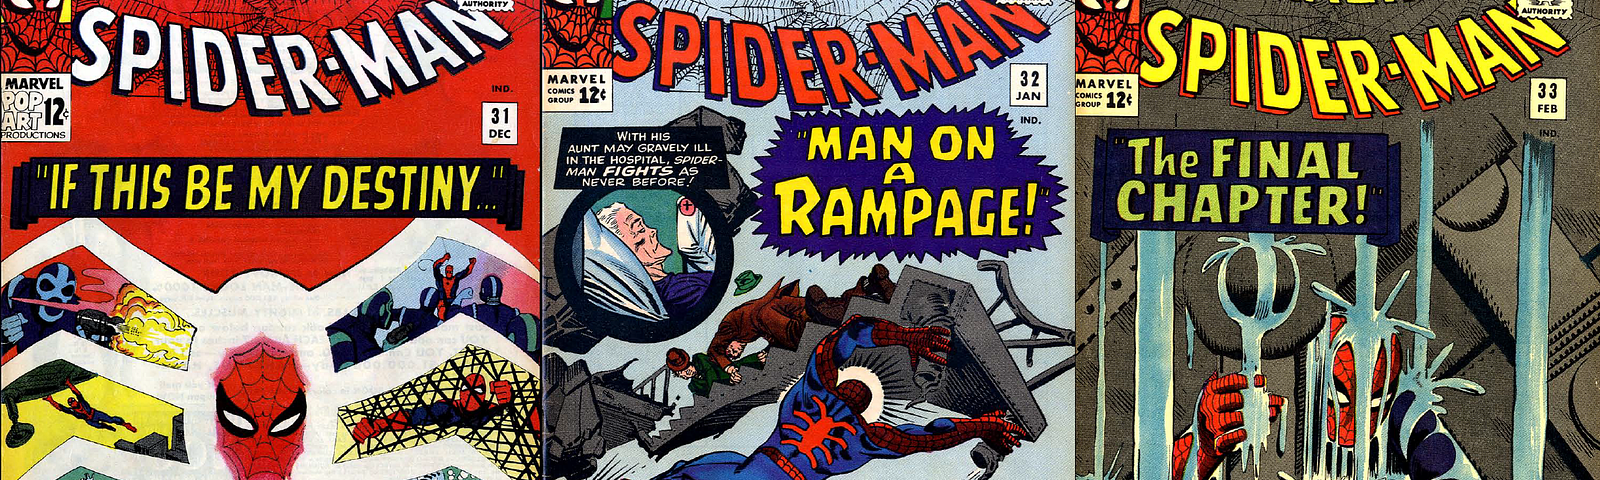 The covers to The Amazing Spider-Man #31 (“If This Be My Destiny…), #32 (“Man on a Rampage!”), and #33 (“The Final Chapter!”), drawn by Steve Ditko.